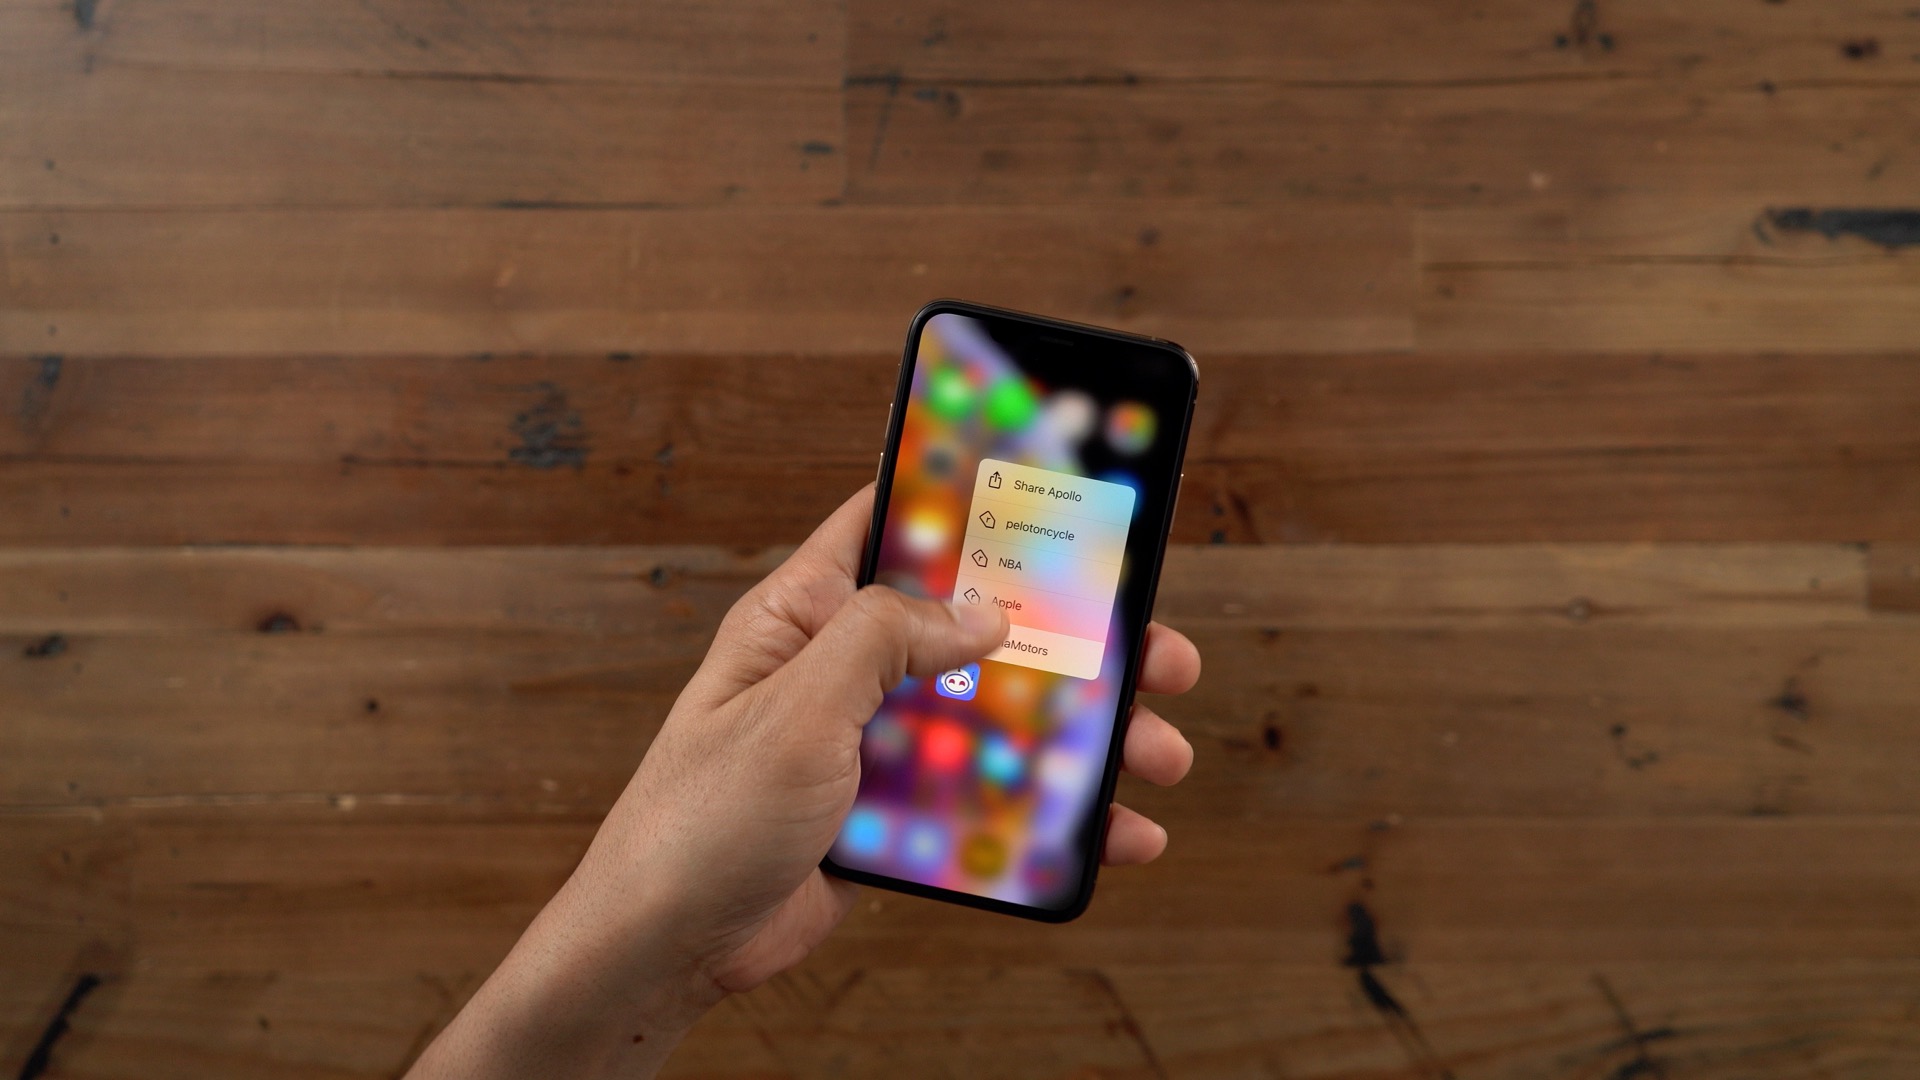 Why was 3D Touch removed from iPhone 11?